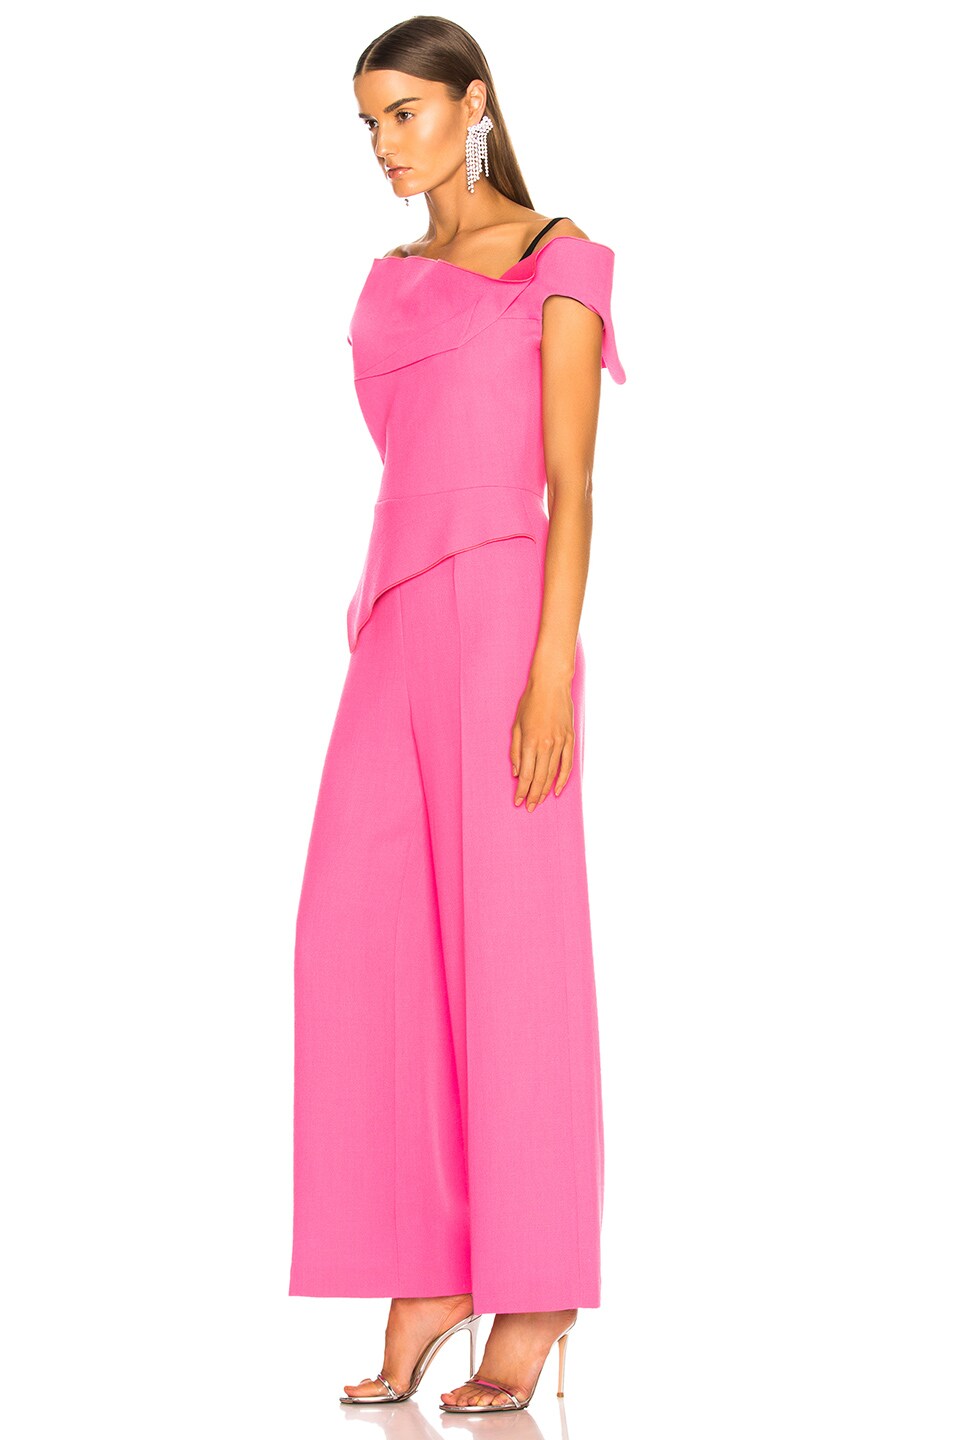 Roland Mouret Gable Double Wool Crepe Jumpsuit in Candy Pink | FWRD